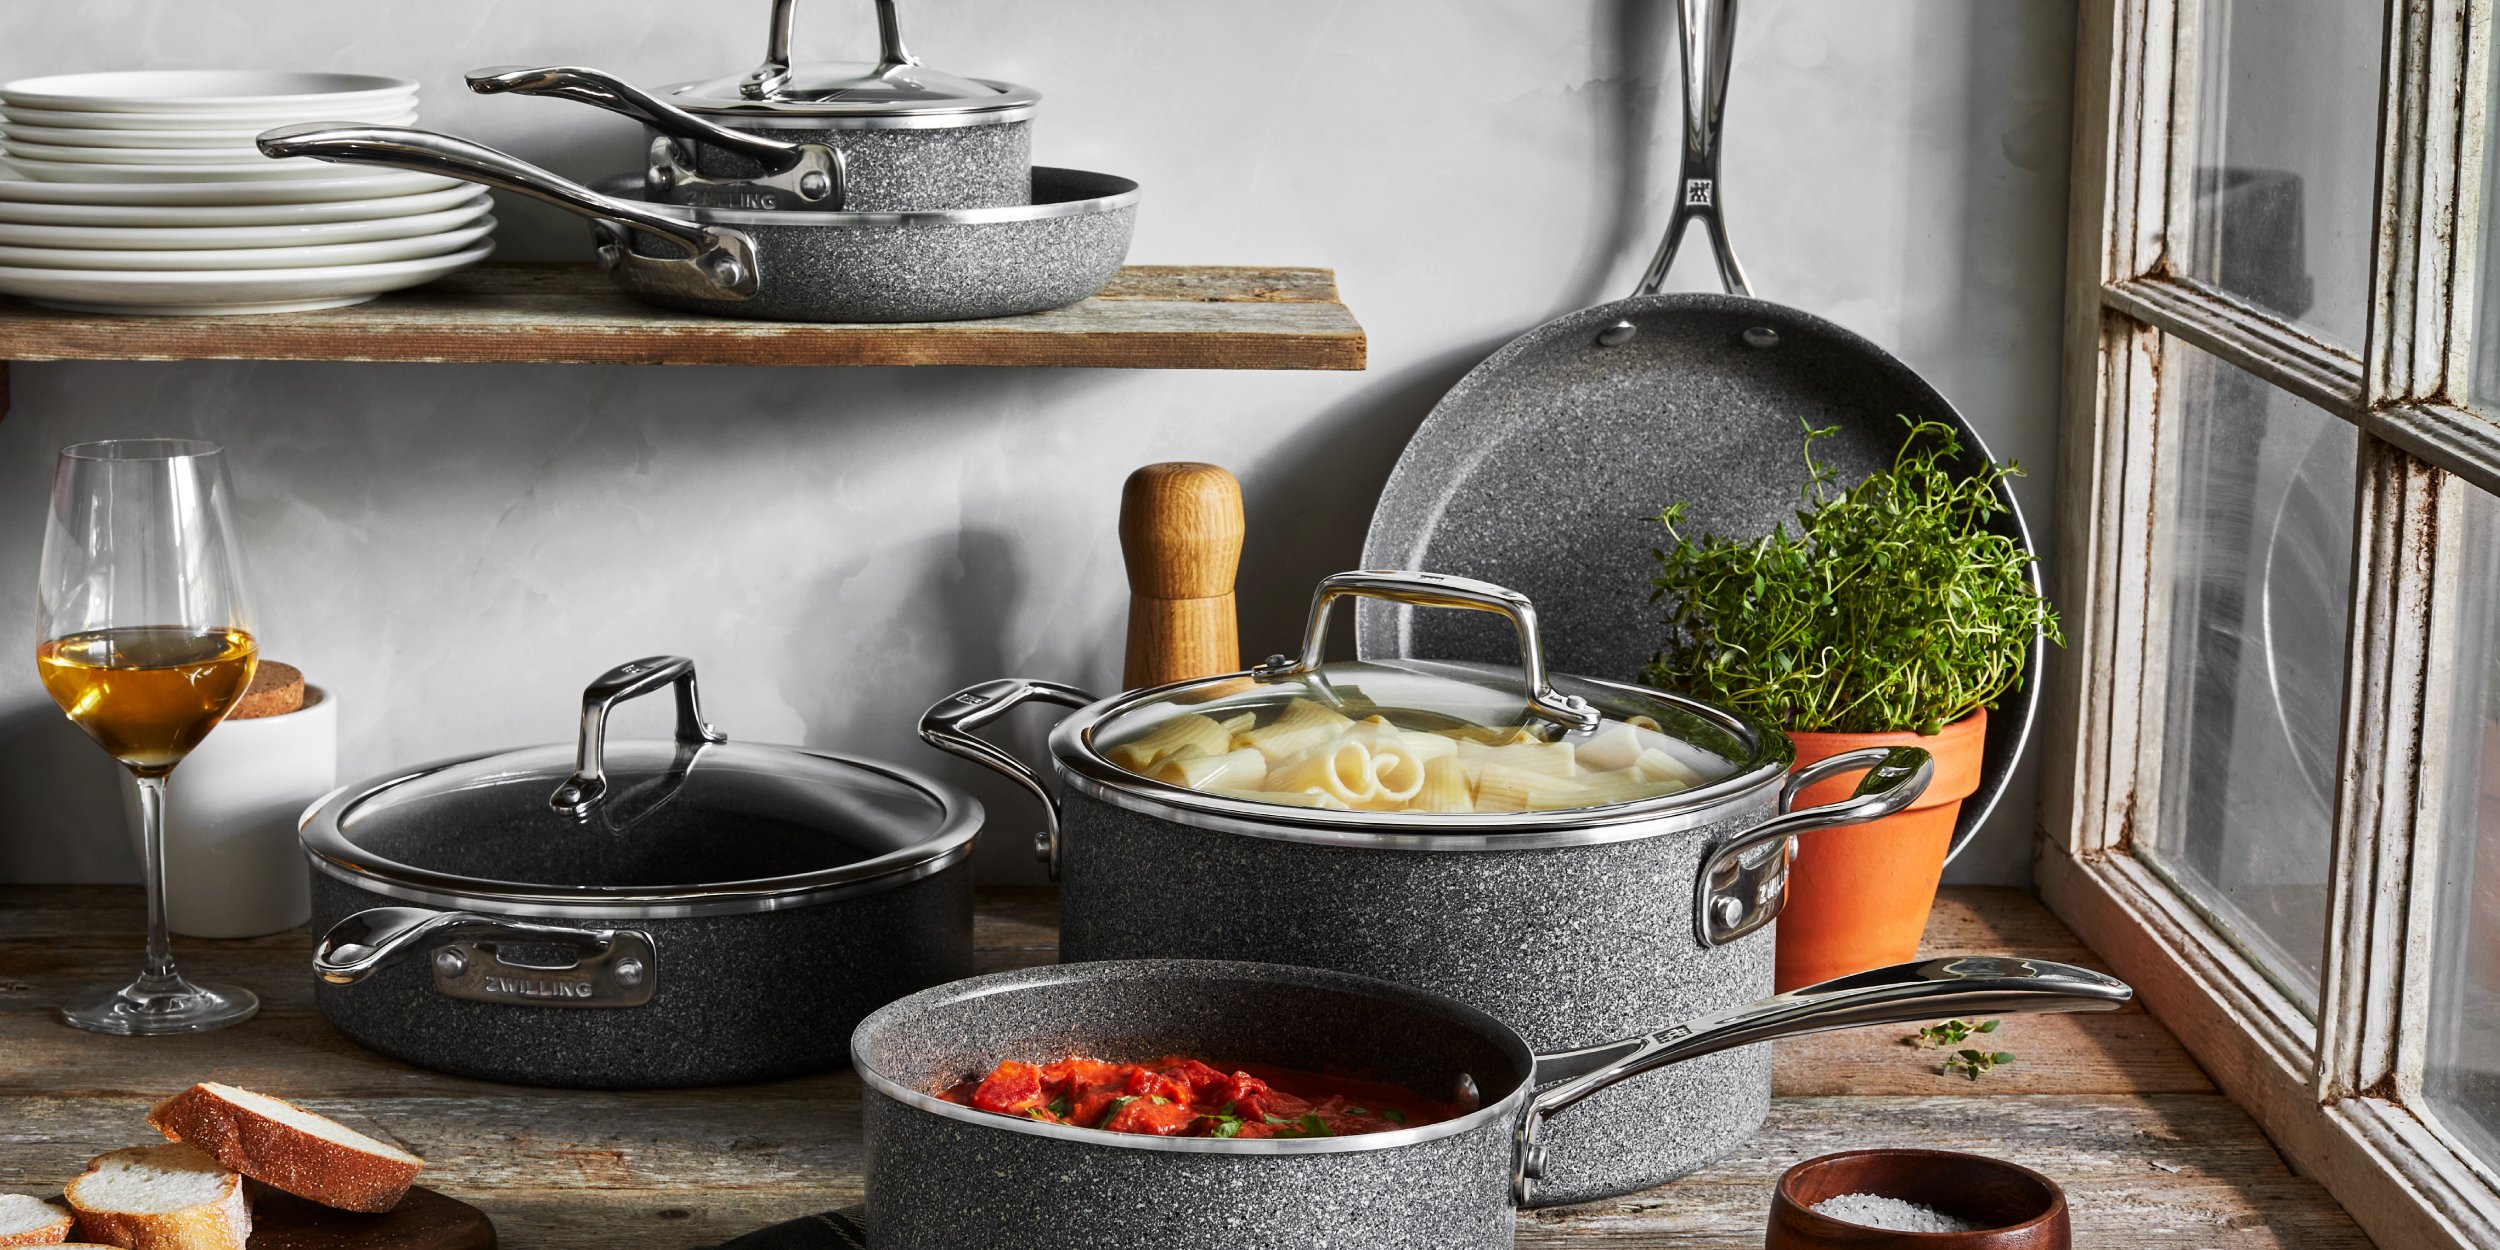 https://www.zwilling.com/on/demandware.static/-/Sites-zwilling-us-Library/default/dw33582e23/images/product-content/masonry-content/zwilling/cookware/vitale/ZW_VITALE_1200-600.jpg